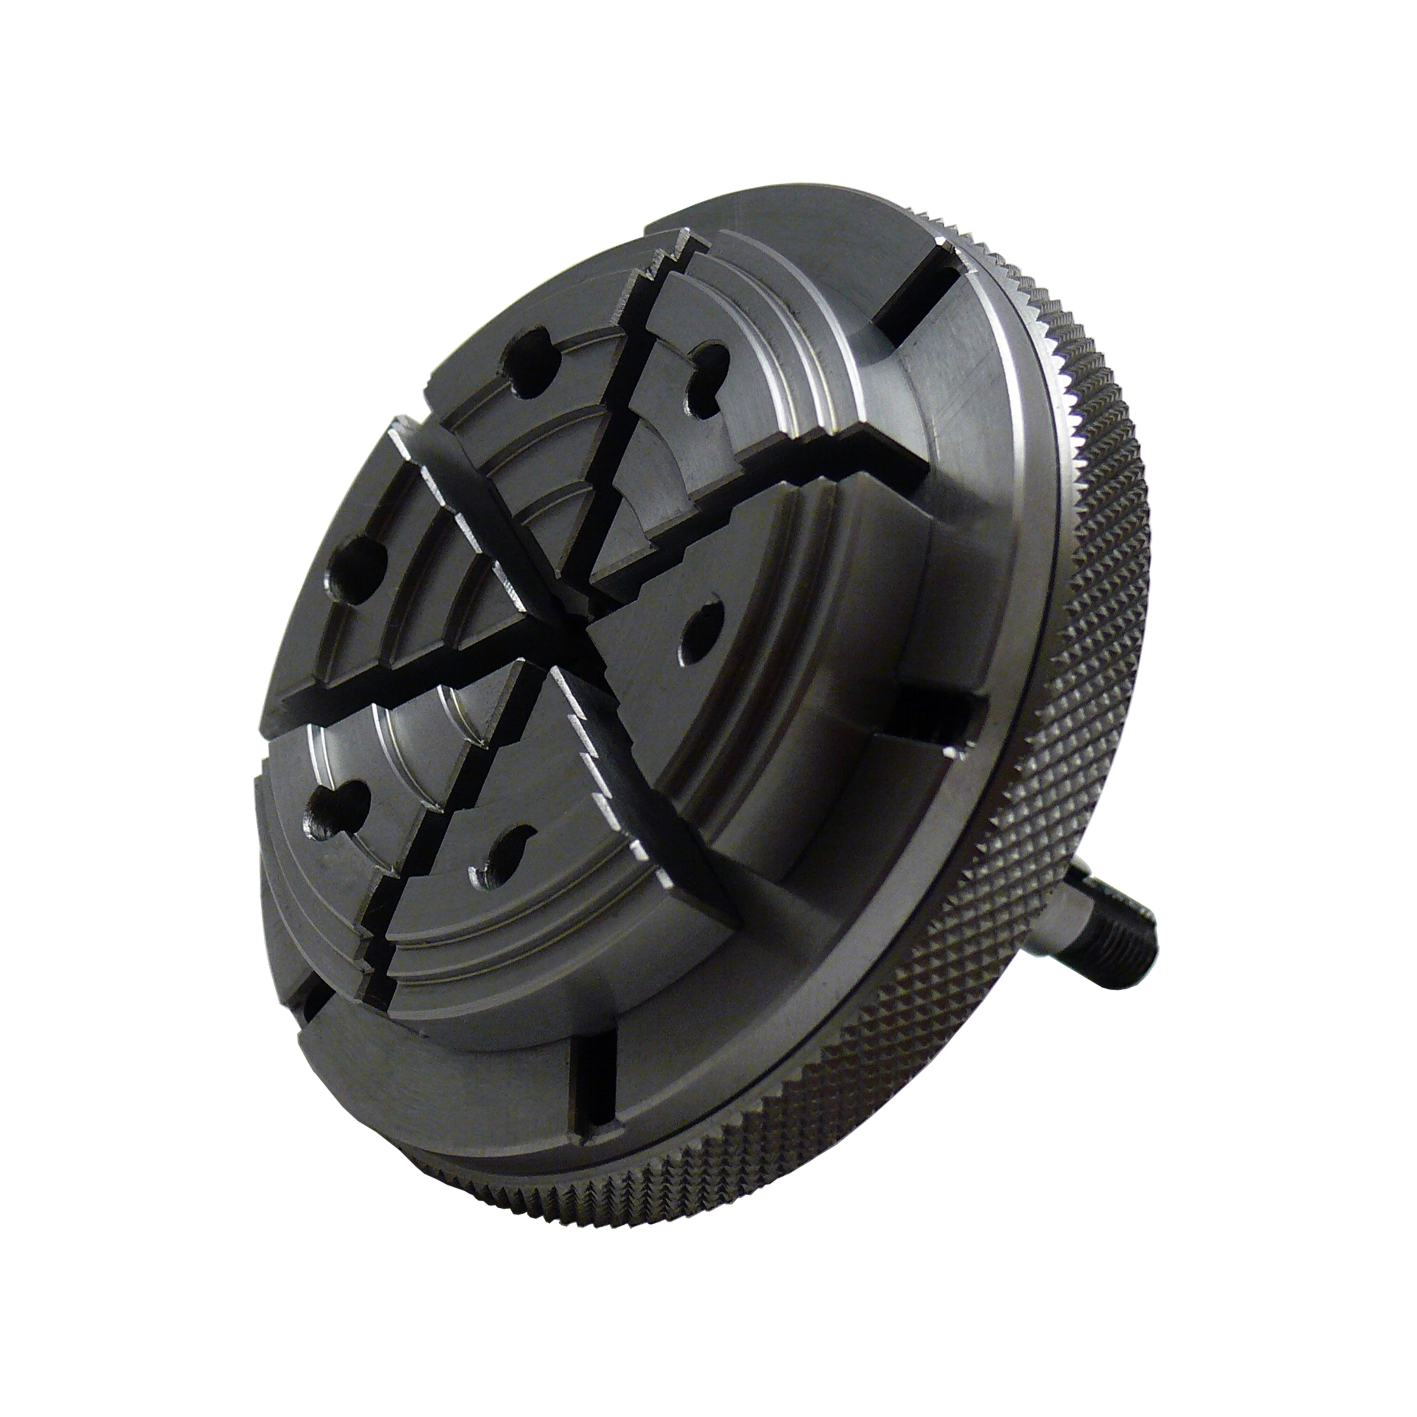 Six-jaw chuck with soft jaws Vector